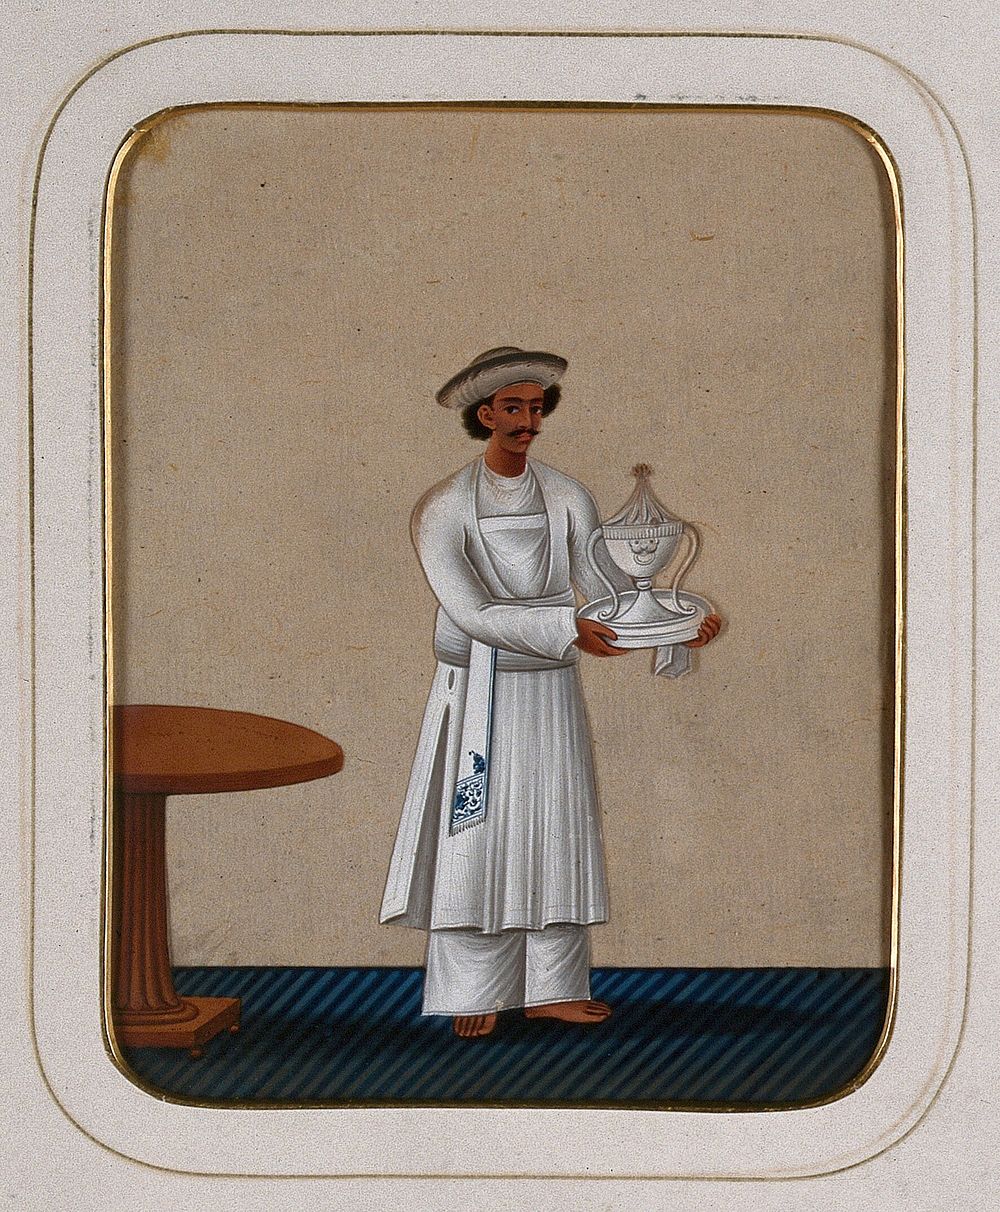 A servant carrying dishes. Gouache painting on mica by an Indian artist.